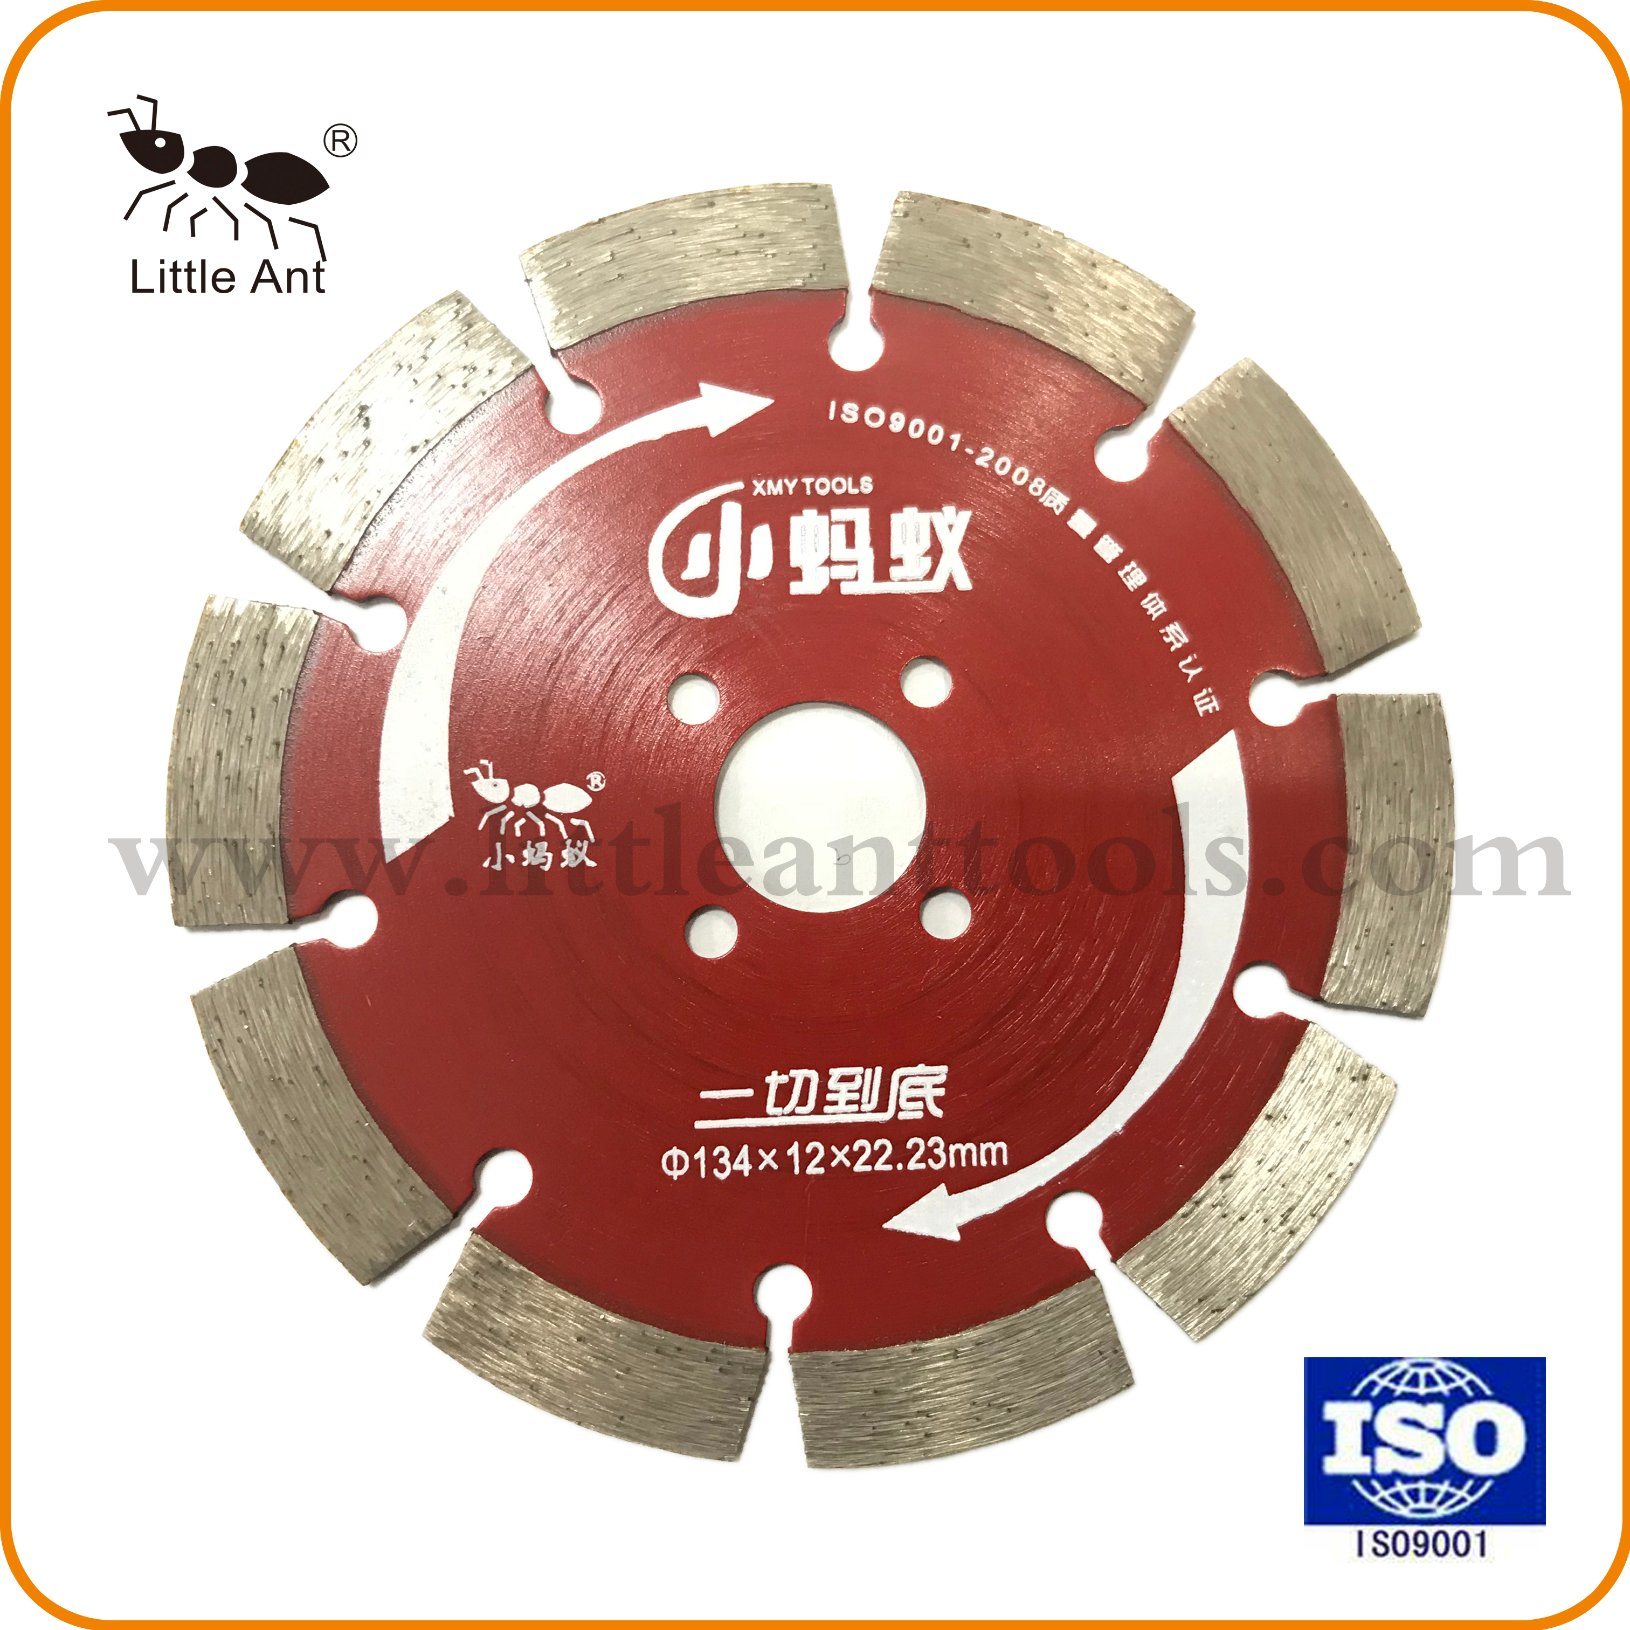 134mm Good Quality Diamond Cutting Tool Saw Blade with Good Sharpness for Granite Cutting